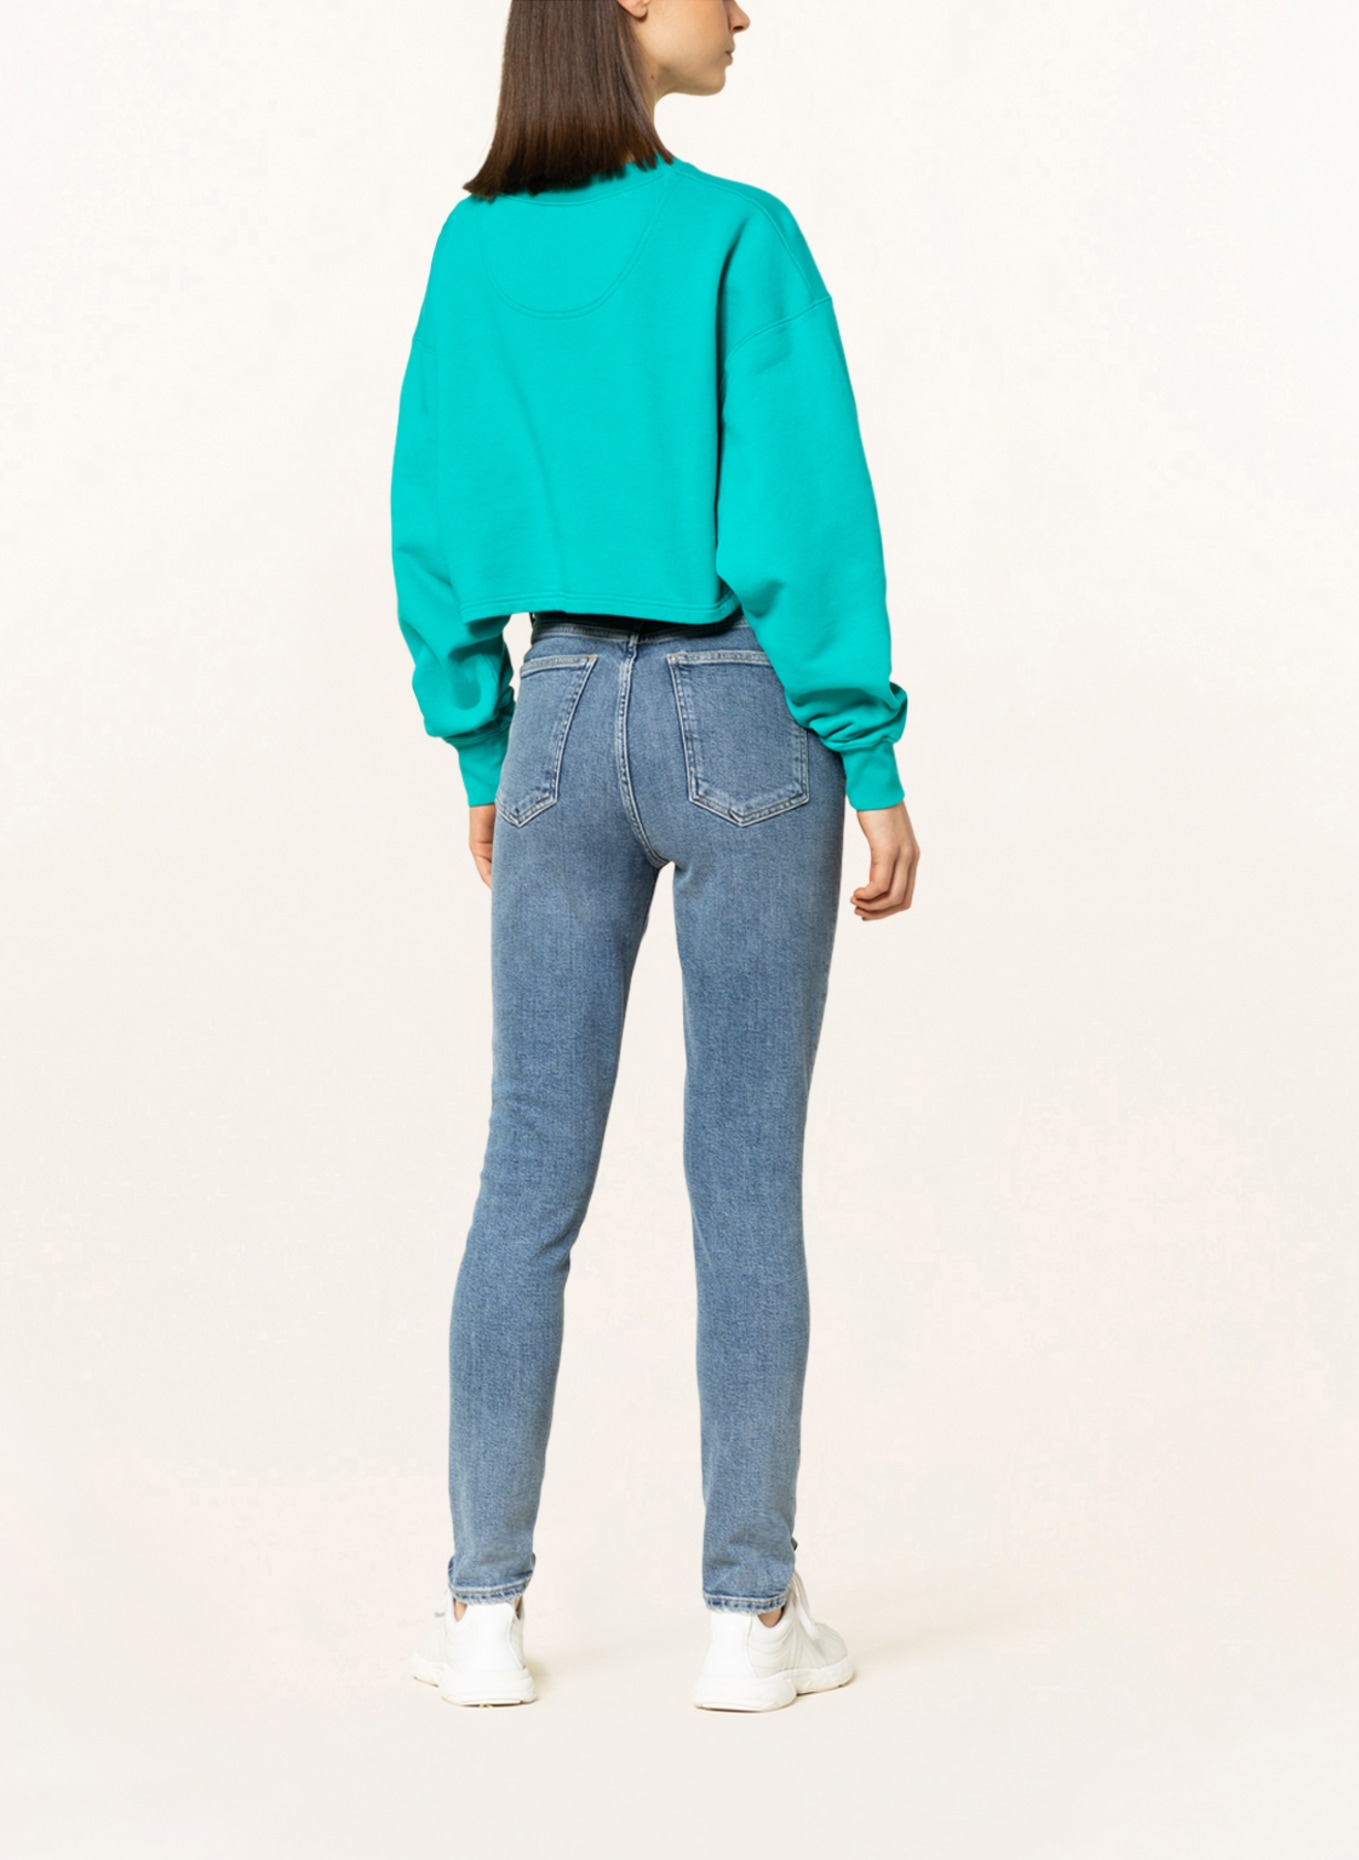 7 DAYS ACTIVE Cropped sweatshirt MONDAY, Color: NEON TURQUOISE (Image 3)